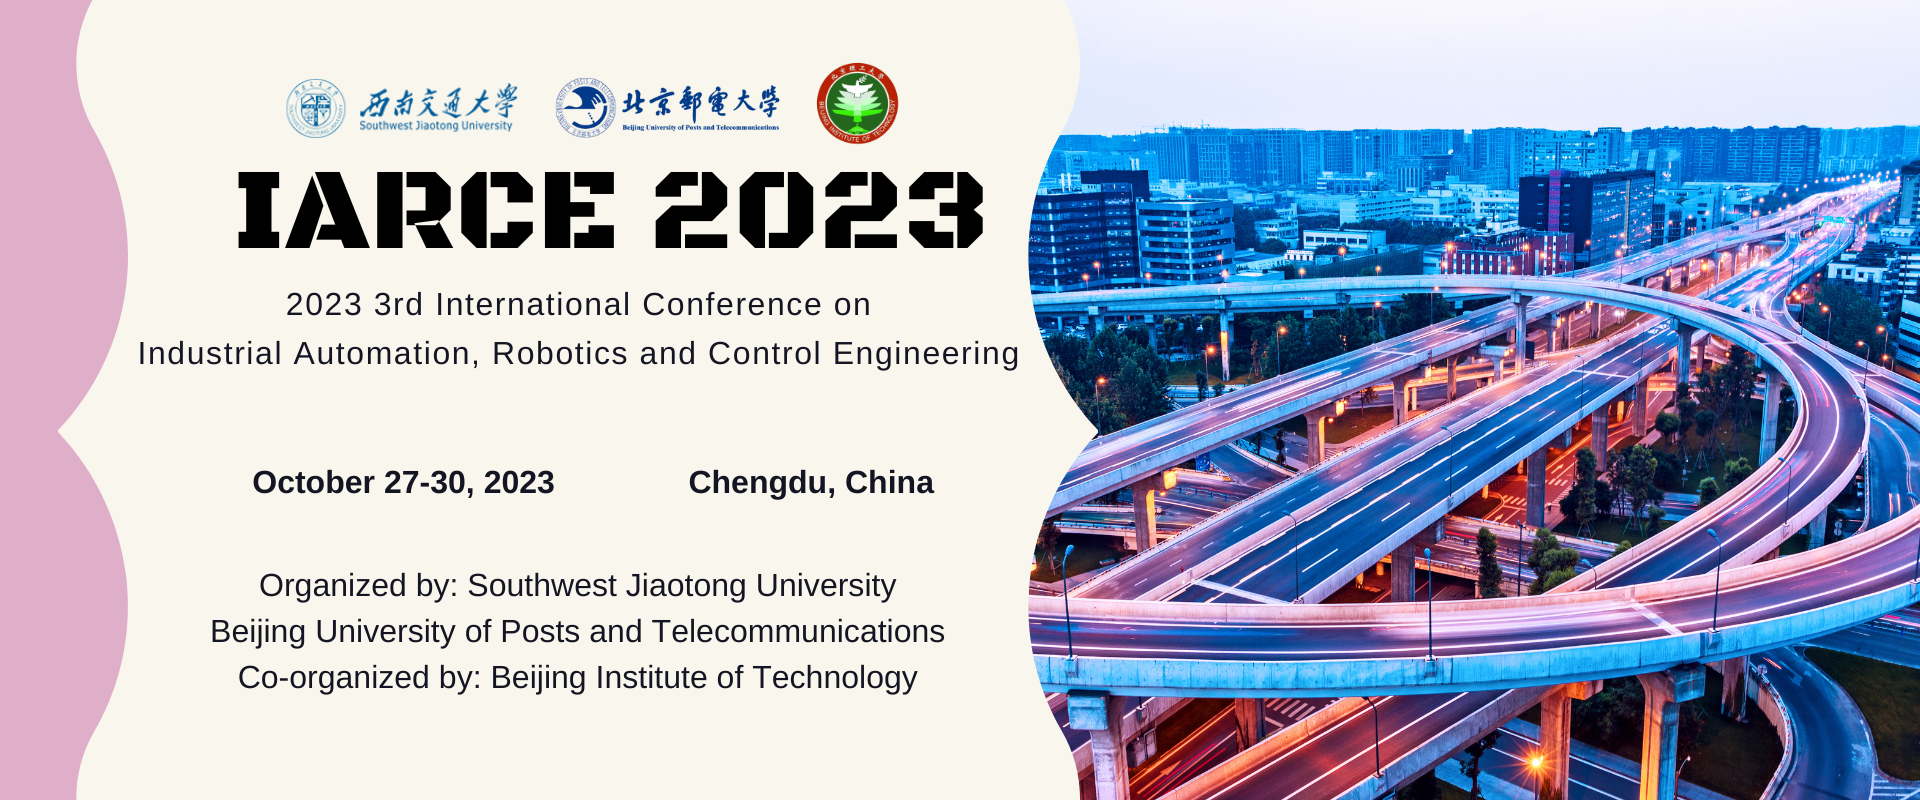 2023 3rd International Conference on Industrial Automation, Robotics and Control Engineering (IARCE 2023), Chengdu, Sichuan, China